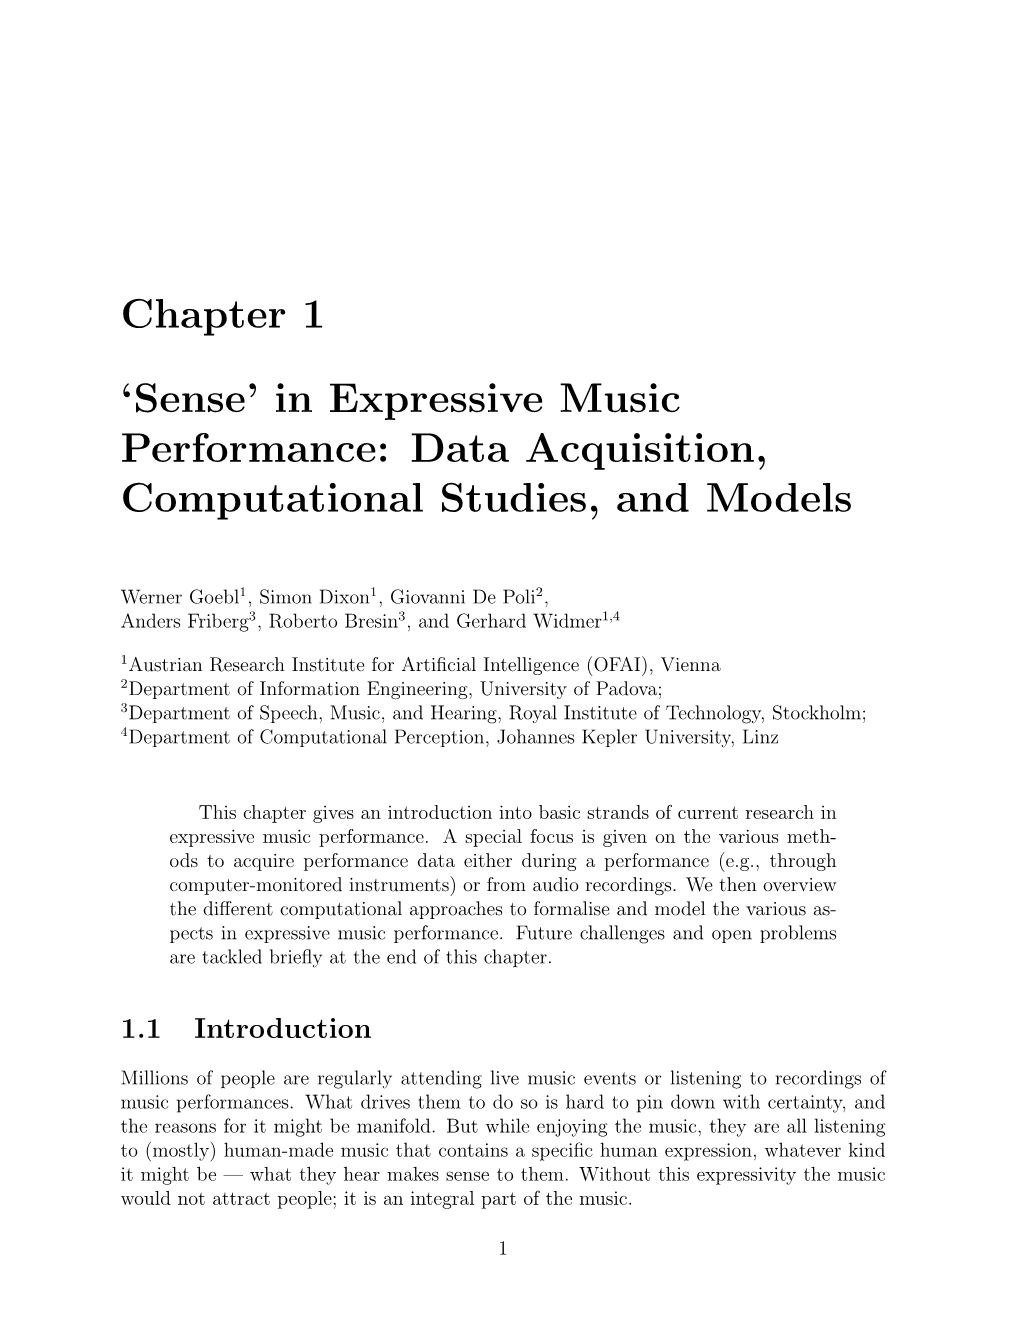 Chapter 1 'Sense' in Expressive Music Performance: Data Acquisition, Computational Studies, and Models